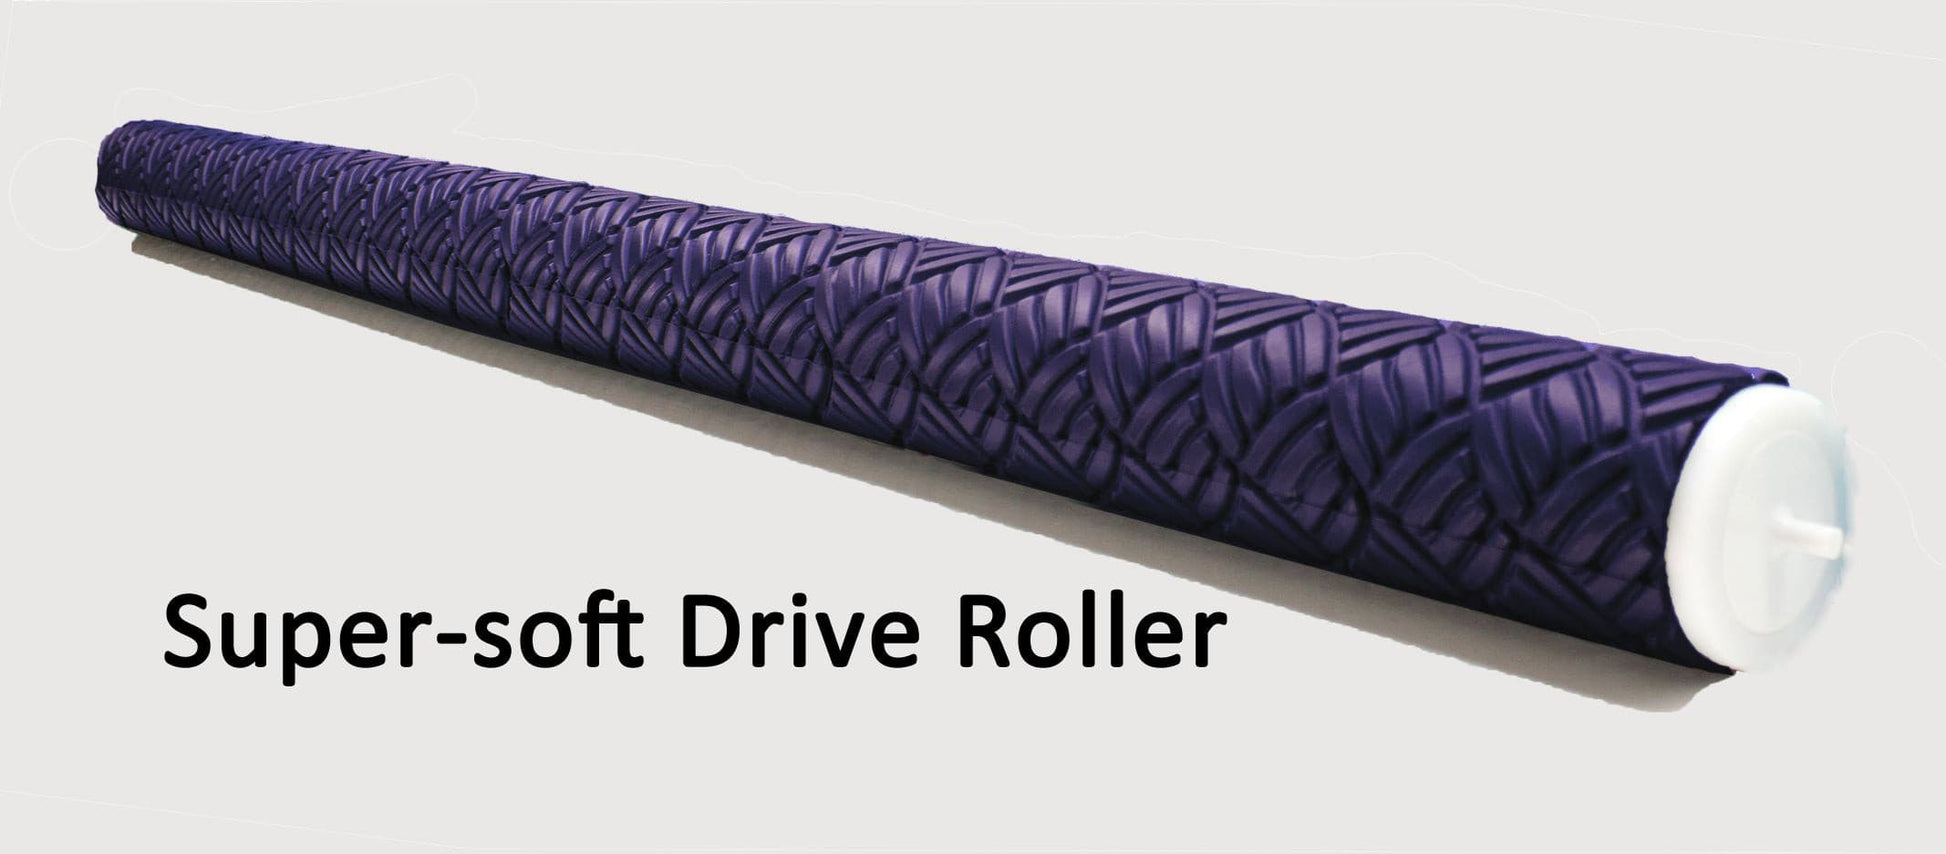 Soft Feel Drive Roller (previously Super-soft Drive Roller)